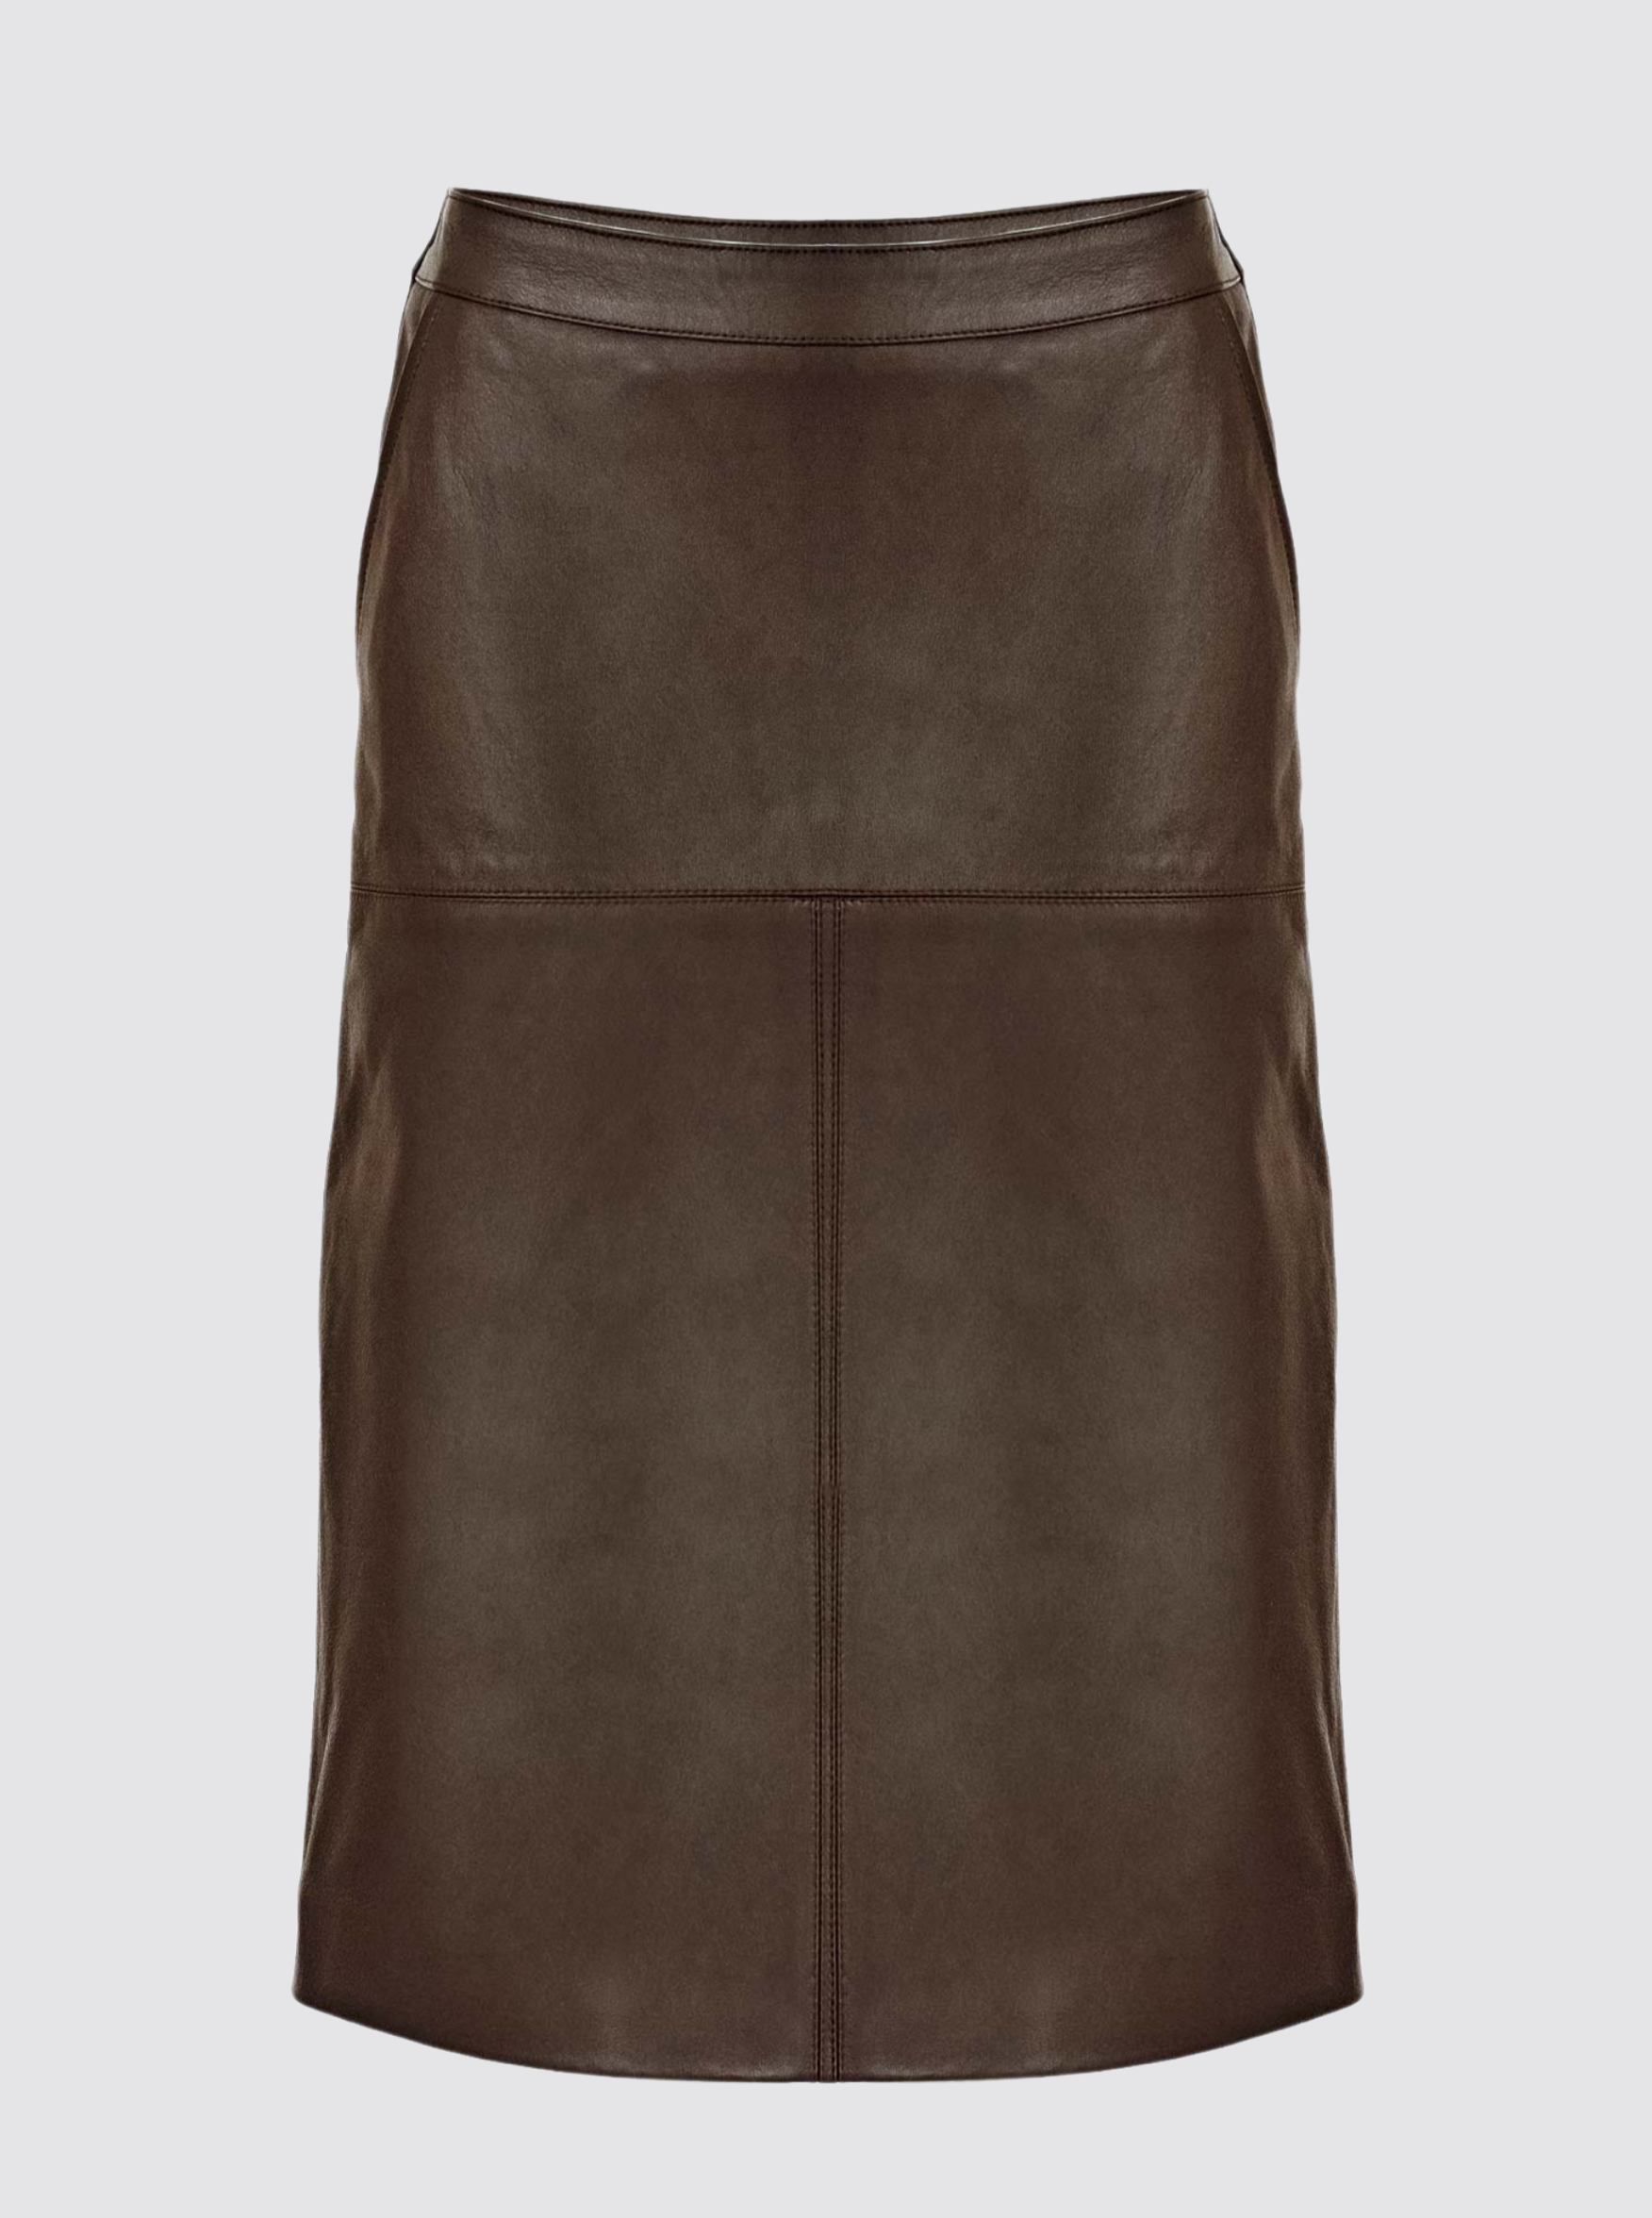  Cleo midi leather skirt in chocolate brown